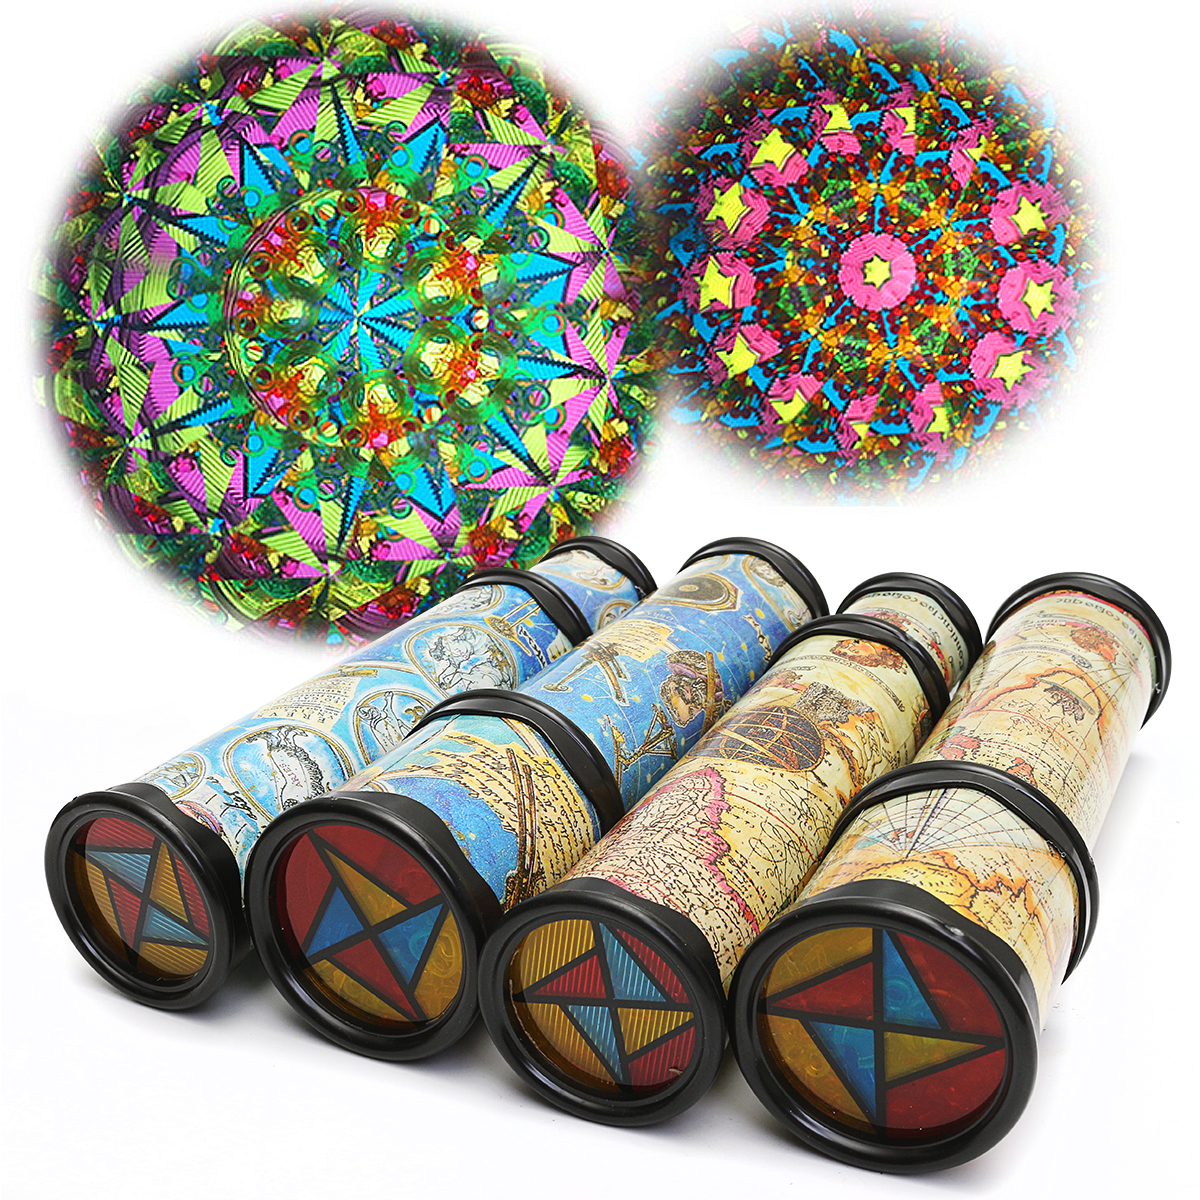 2030cm-Blue-Yellow-Magical-Rotate-Kaleidoscope-Toy-Extended-Rotation-Fancy-Colored-World-Kids-Toy-1258764